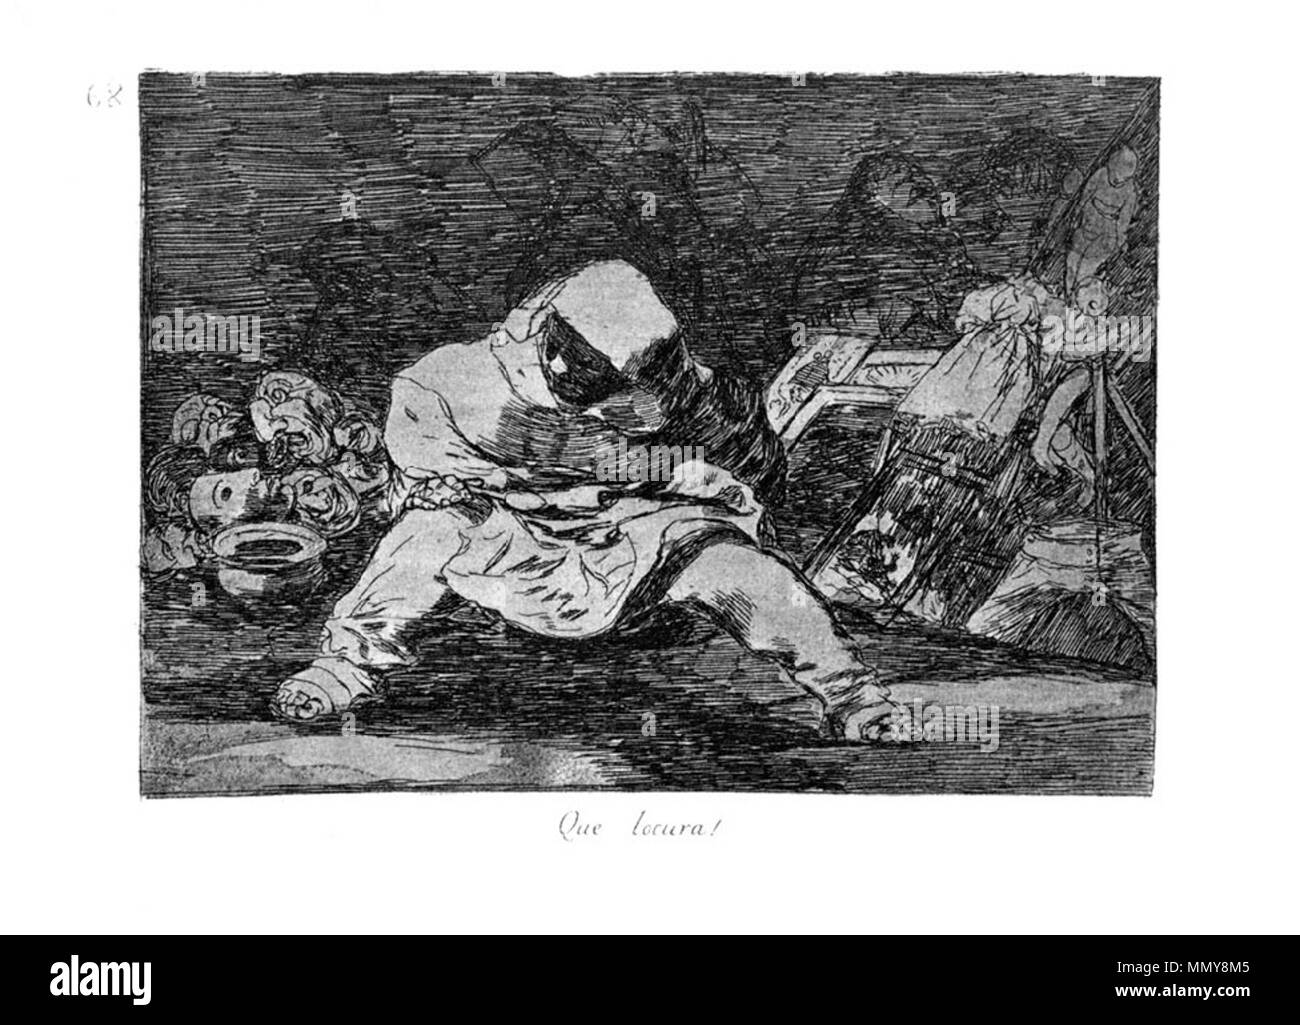 . Los Desatres de la Guerra is a set of 80 aquatint prints created by Francisco Goya in the 1810s. Plate 68: Que locura! (What madness!)  . 1810s.   Francisco Goya  (1746–1828)      Alternative names Francisco Goya Lucientes, Francisco de Goya y Lucientes, Francisco José Goya Lucientes  Description Spanish painter, printmaker, lithographer, engraver and etcher  Date of birth/death 30 March 1746 16 April 1828  Location of birth/death Fuendetodos Bordeaux  Work location Madrid, Zaragoza, Bordeaux  Authority control  : Q5432 VIAF:?54343141 ISNI:?0000 0001 2280 1608 ULAN:?500118936 LCCN:?n79003363 Stock Photo